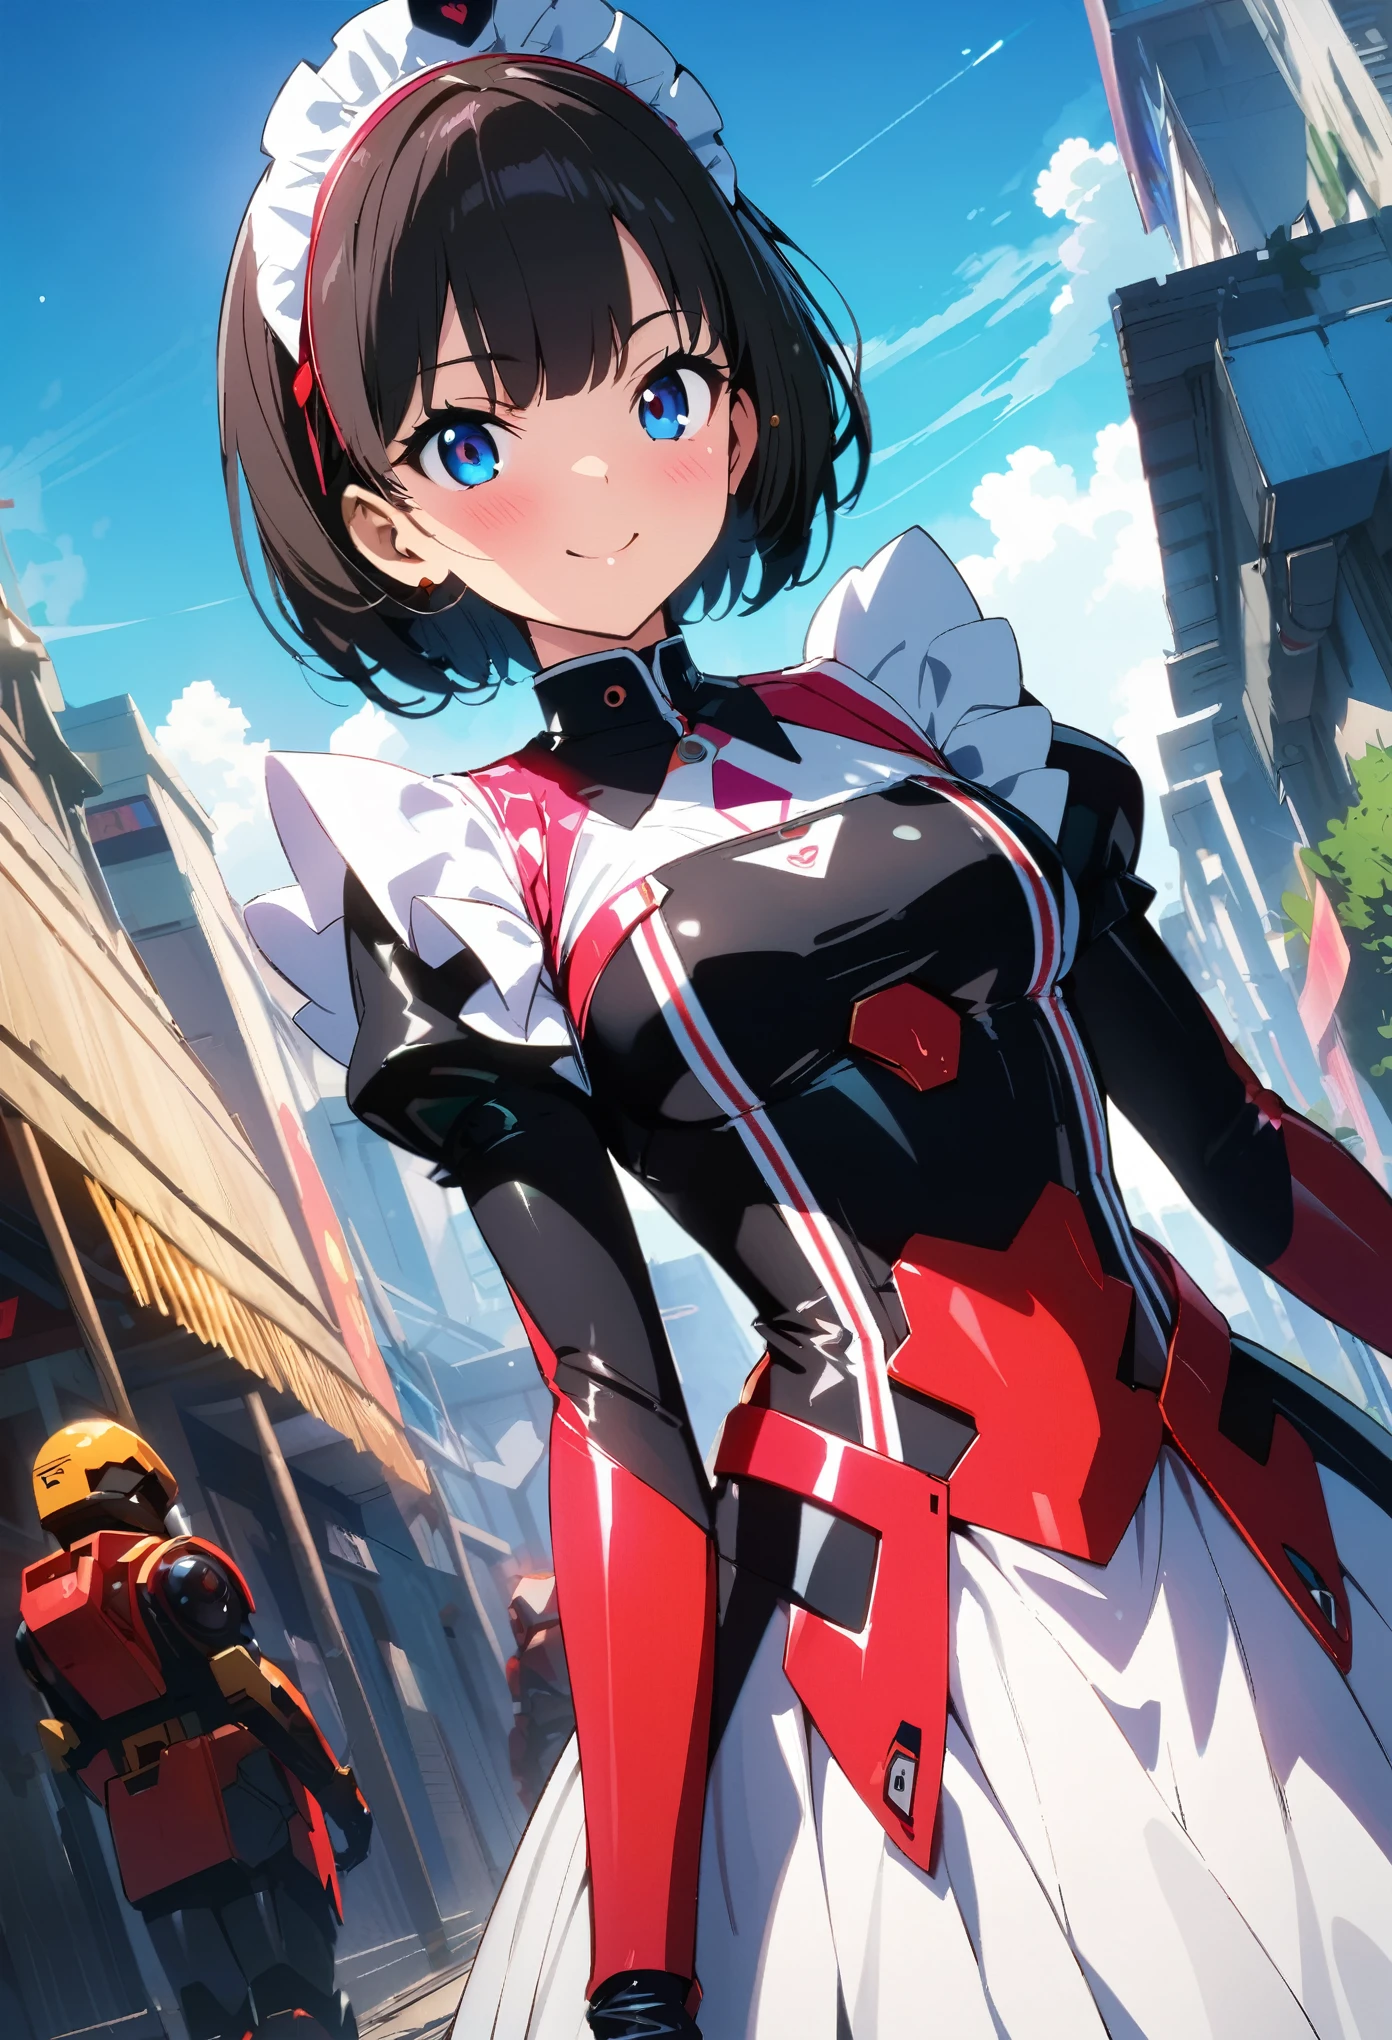 (highest quality:1.2, 4K, 8k, Studio Anime, Very detailed, up to date, Vibrant, High detail, High Contrast, masterpiece:1.2, highest quality, Best aesthetics), (((1 girl))), Stand and pose, Maid, Maid服, Cyber Suit:1.2, サイバーパンクMaid服:1.4, Bodysuits, Headdress, Frills, Mecha Dress Suit, Blushing:1.2, smile, Dynamic Angle, Dutch Angle:1.3, Friendly atmosphere, Put your hands up, Fun and young々Shii々Cool vibe, Precision and focus, Striking contrast,